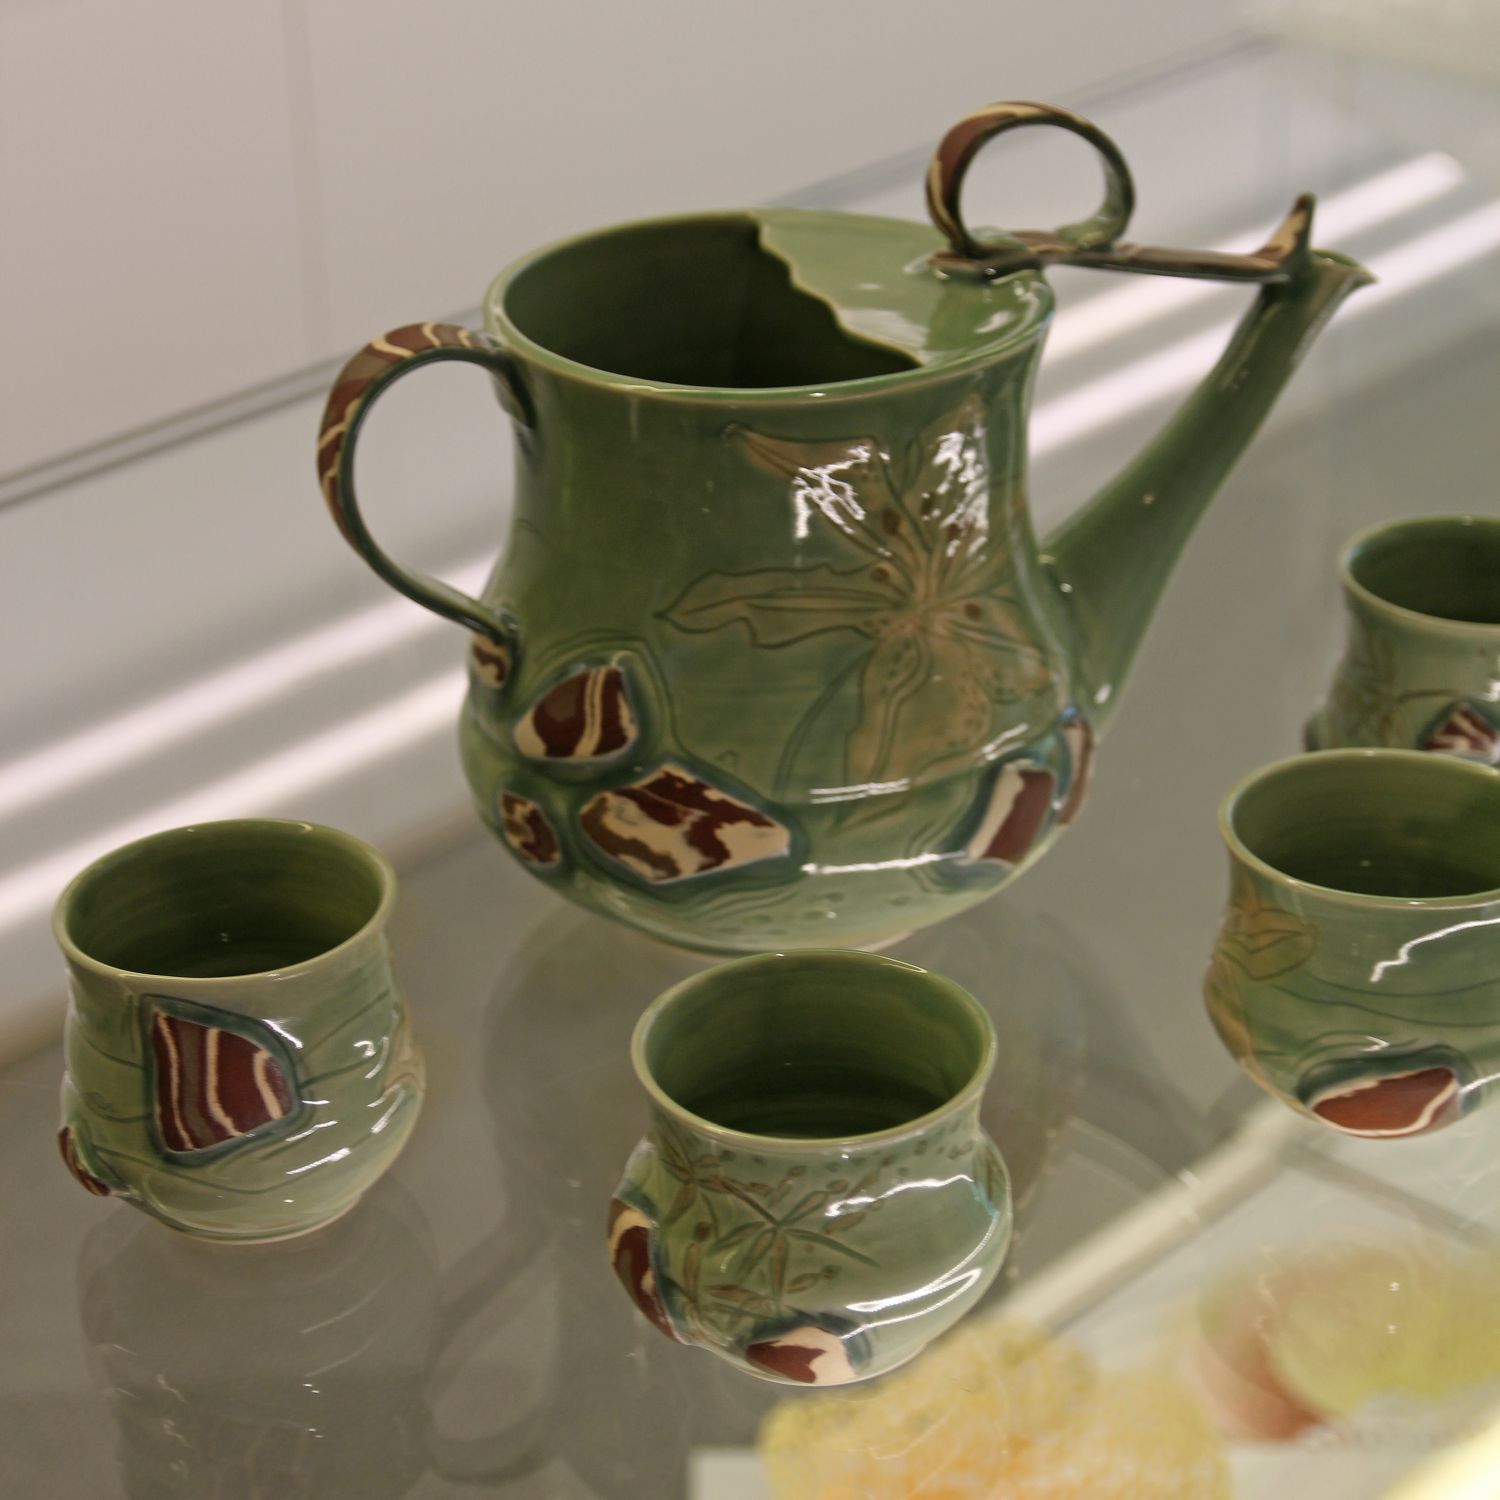 Kristina Rose Studios: Jug and Four Cups (Sold as a set of five) Product Image 4 of 6